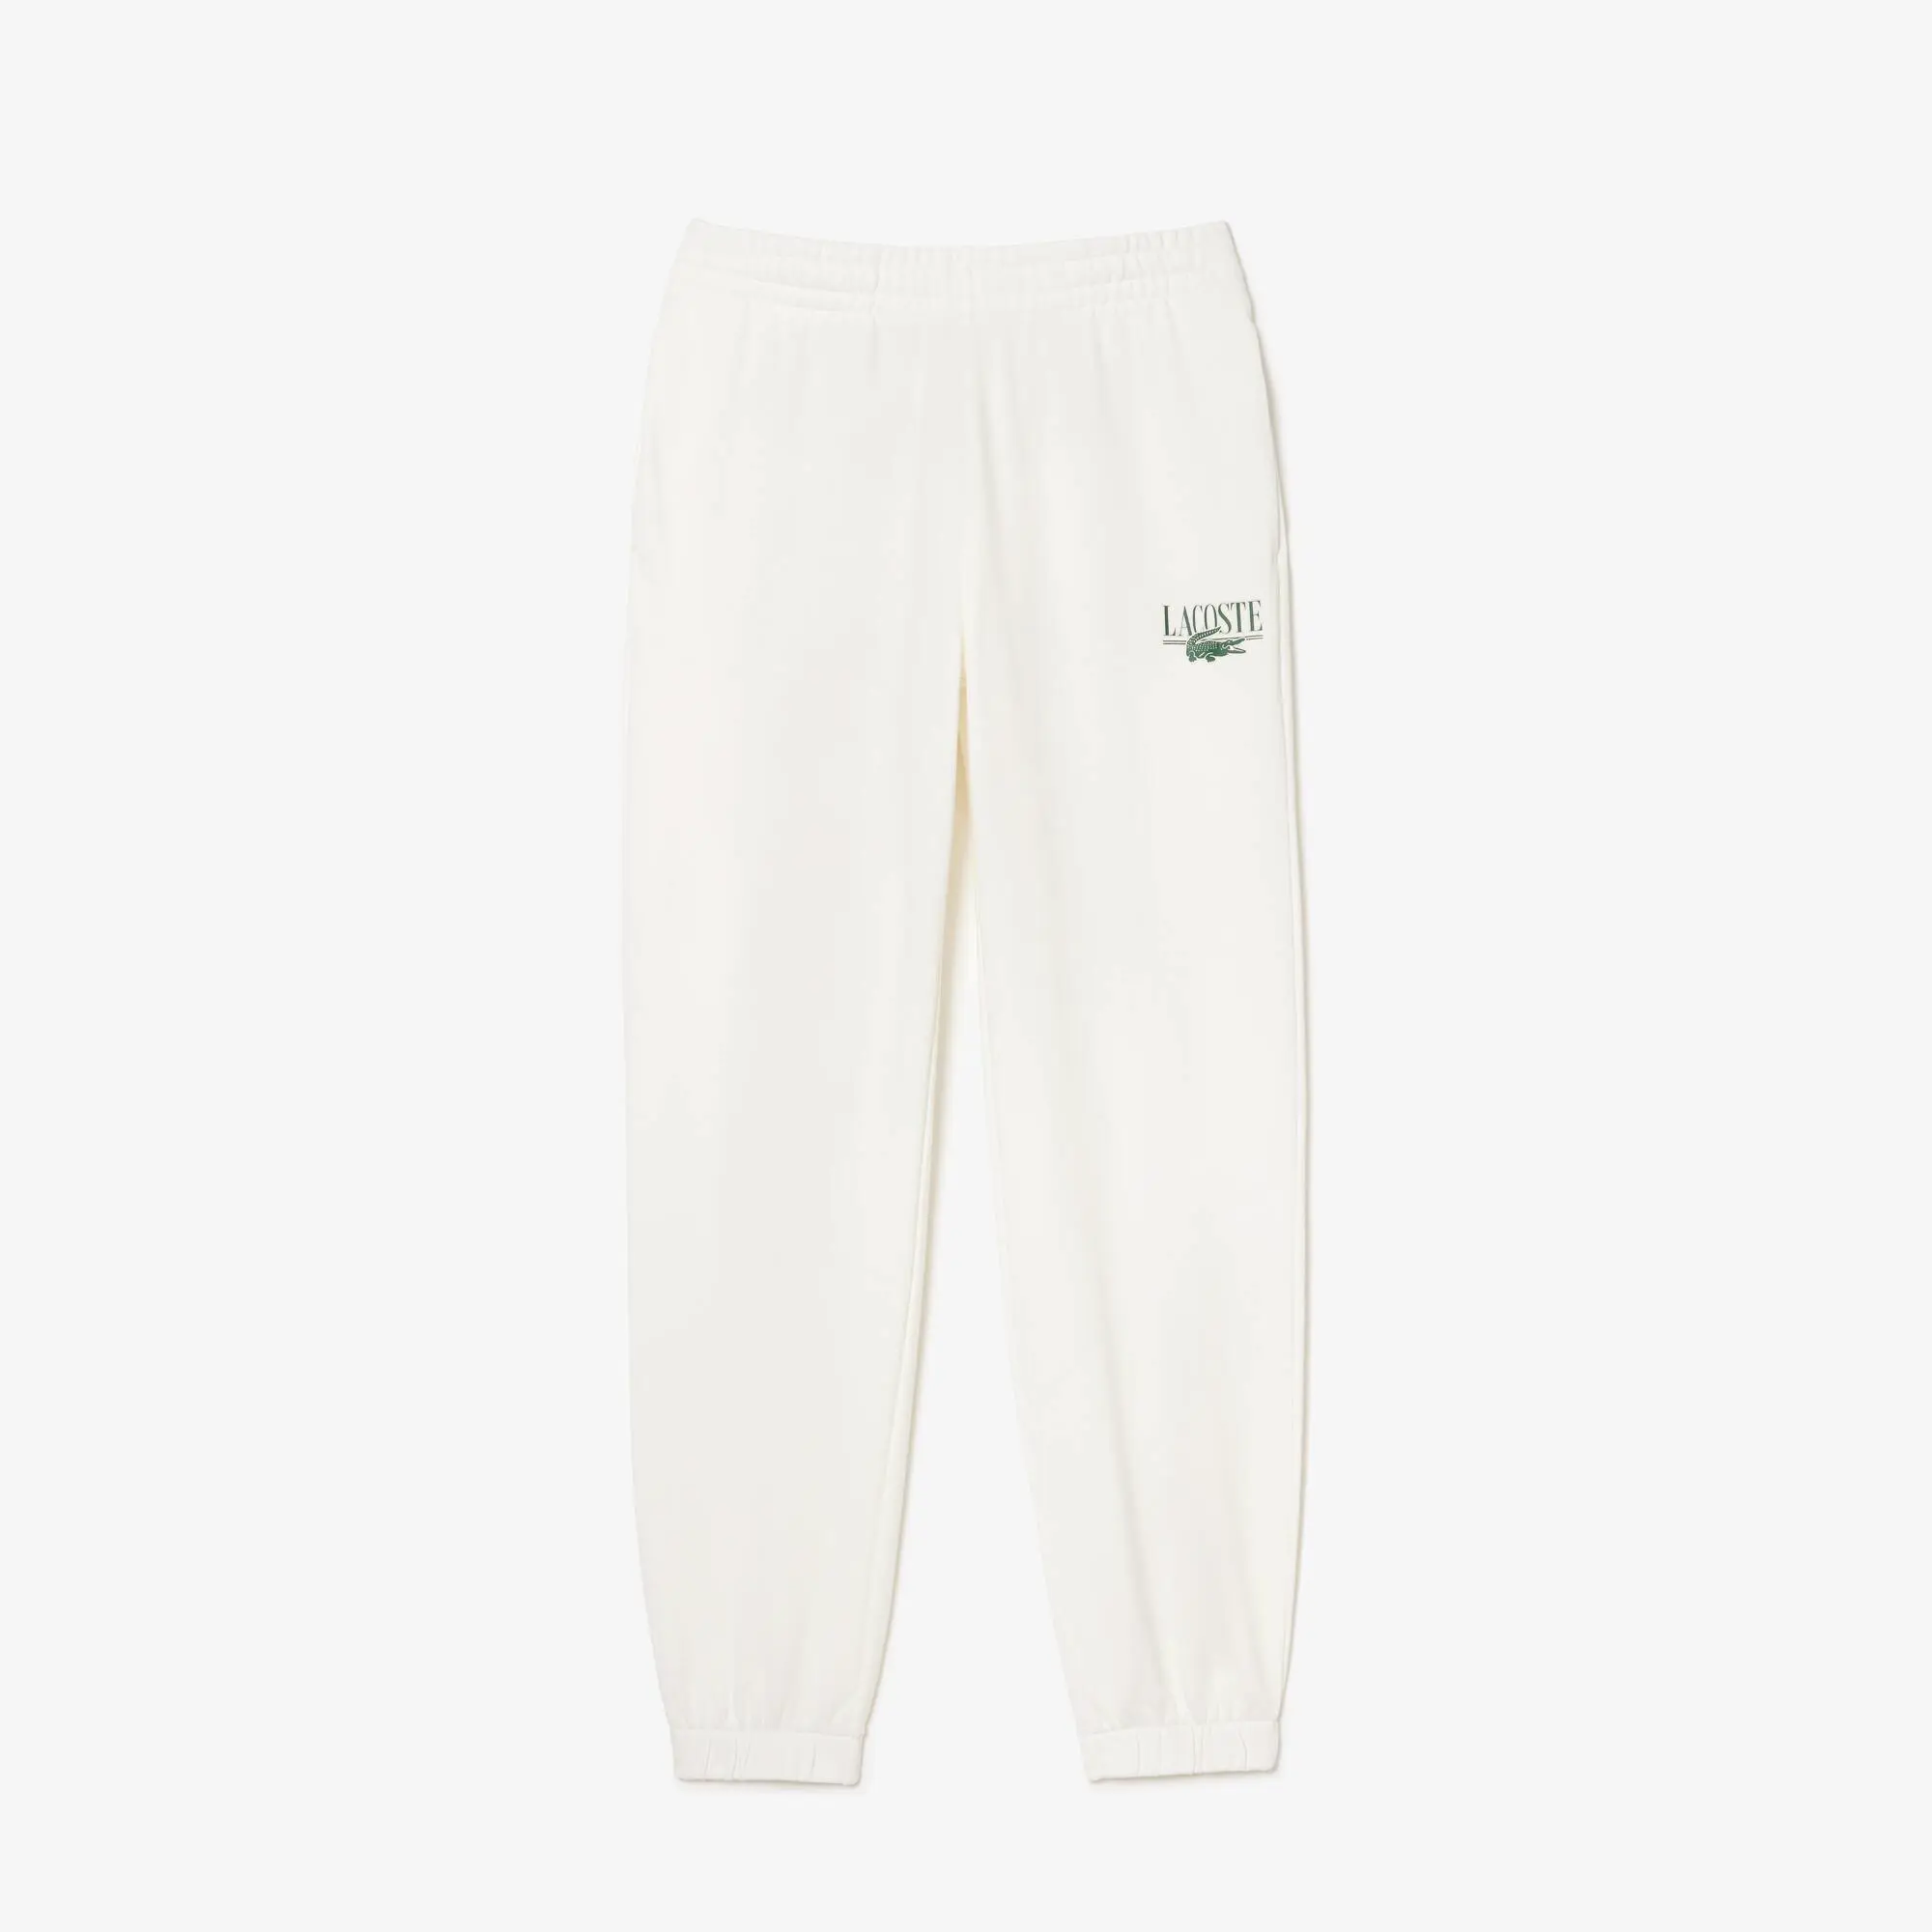 Lacoste Printed Jogger Track Pants. 2